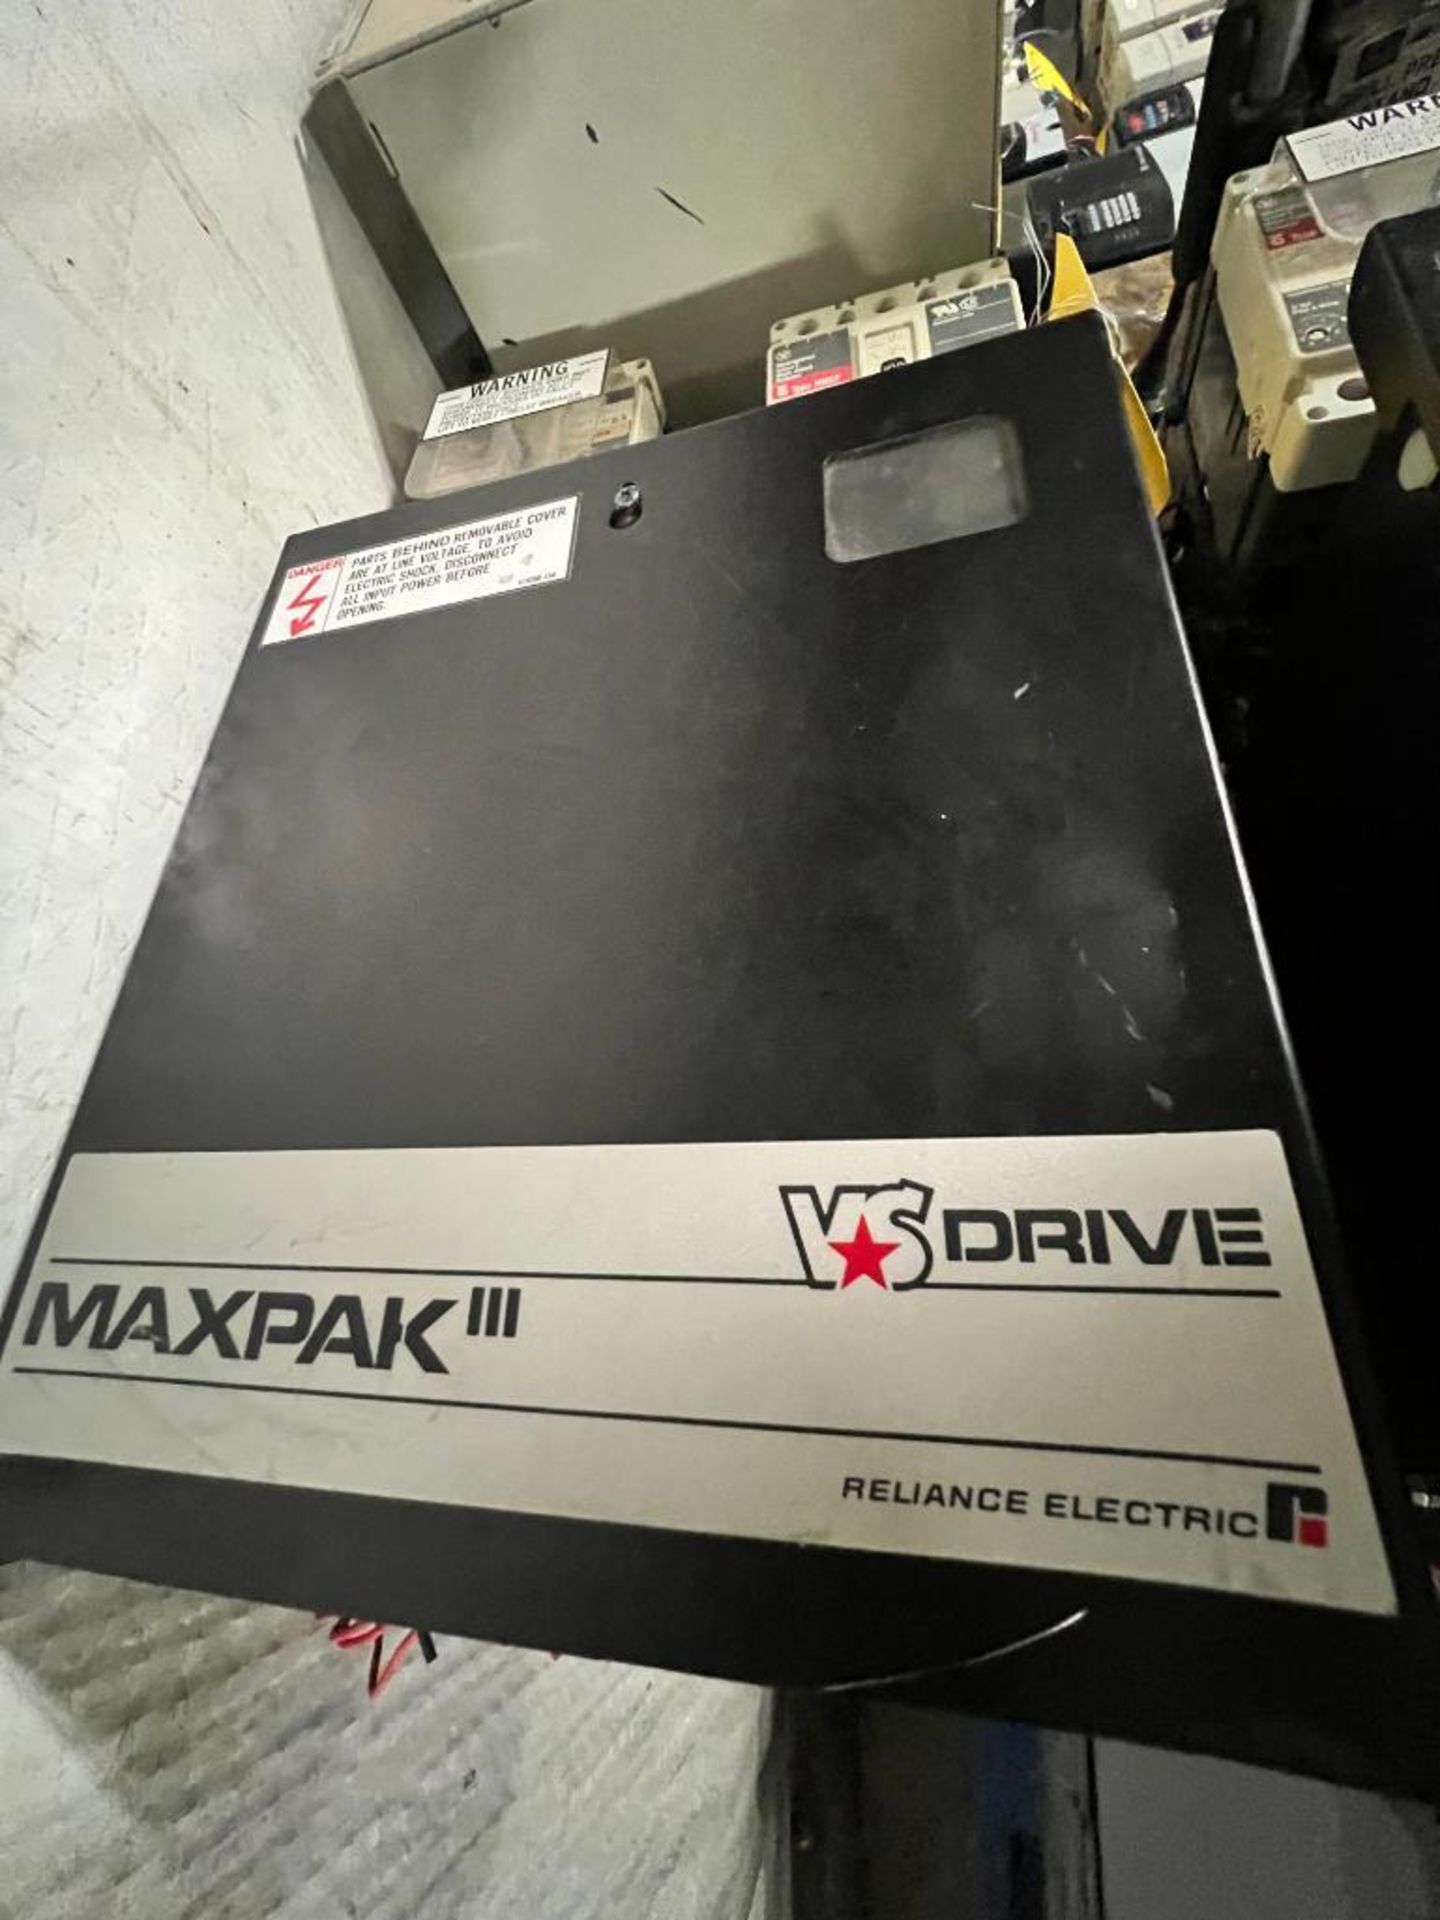 Reliance, Electric Variable Speed Drive Maxpak 111, 3-Phase - Image 6 of 6